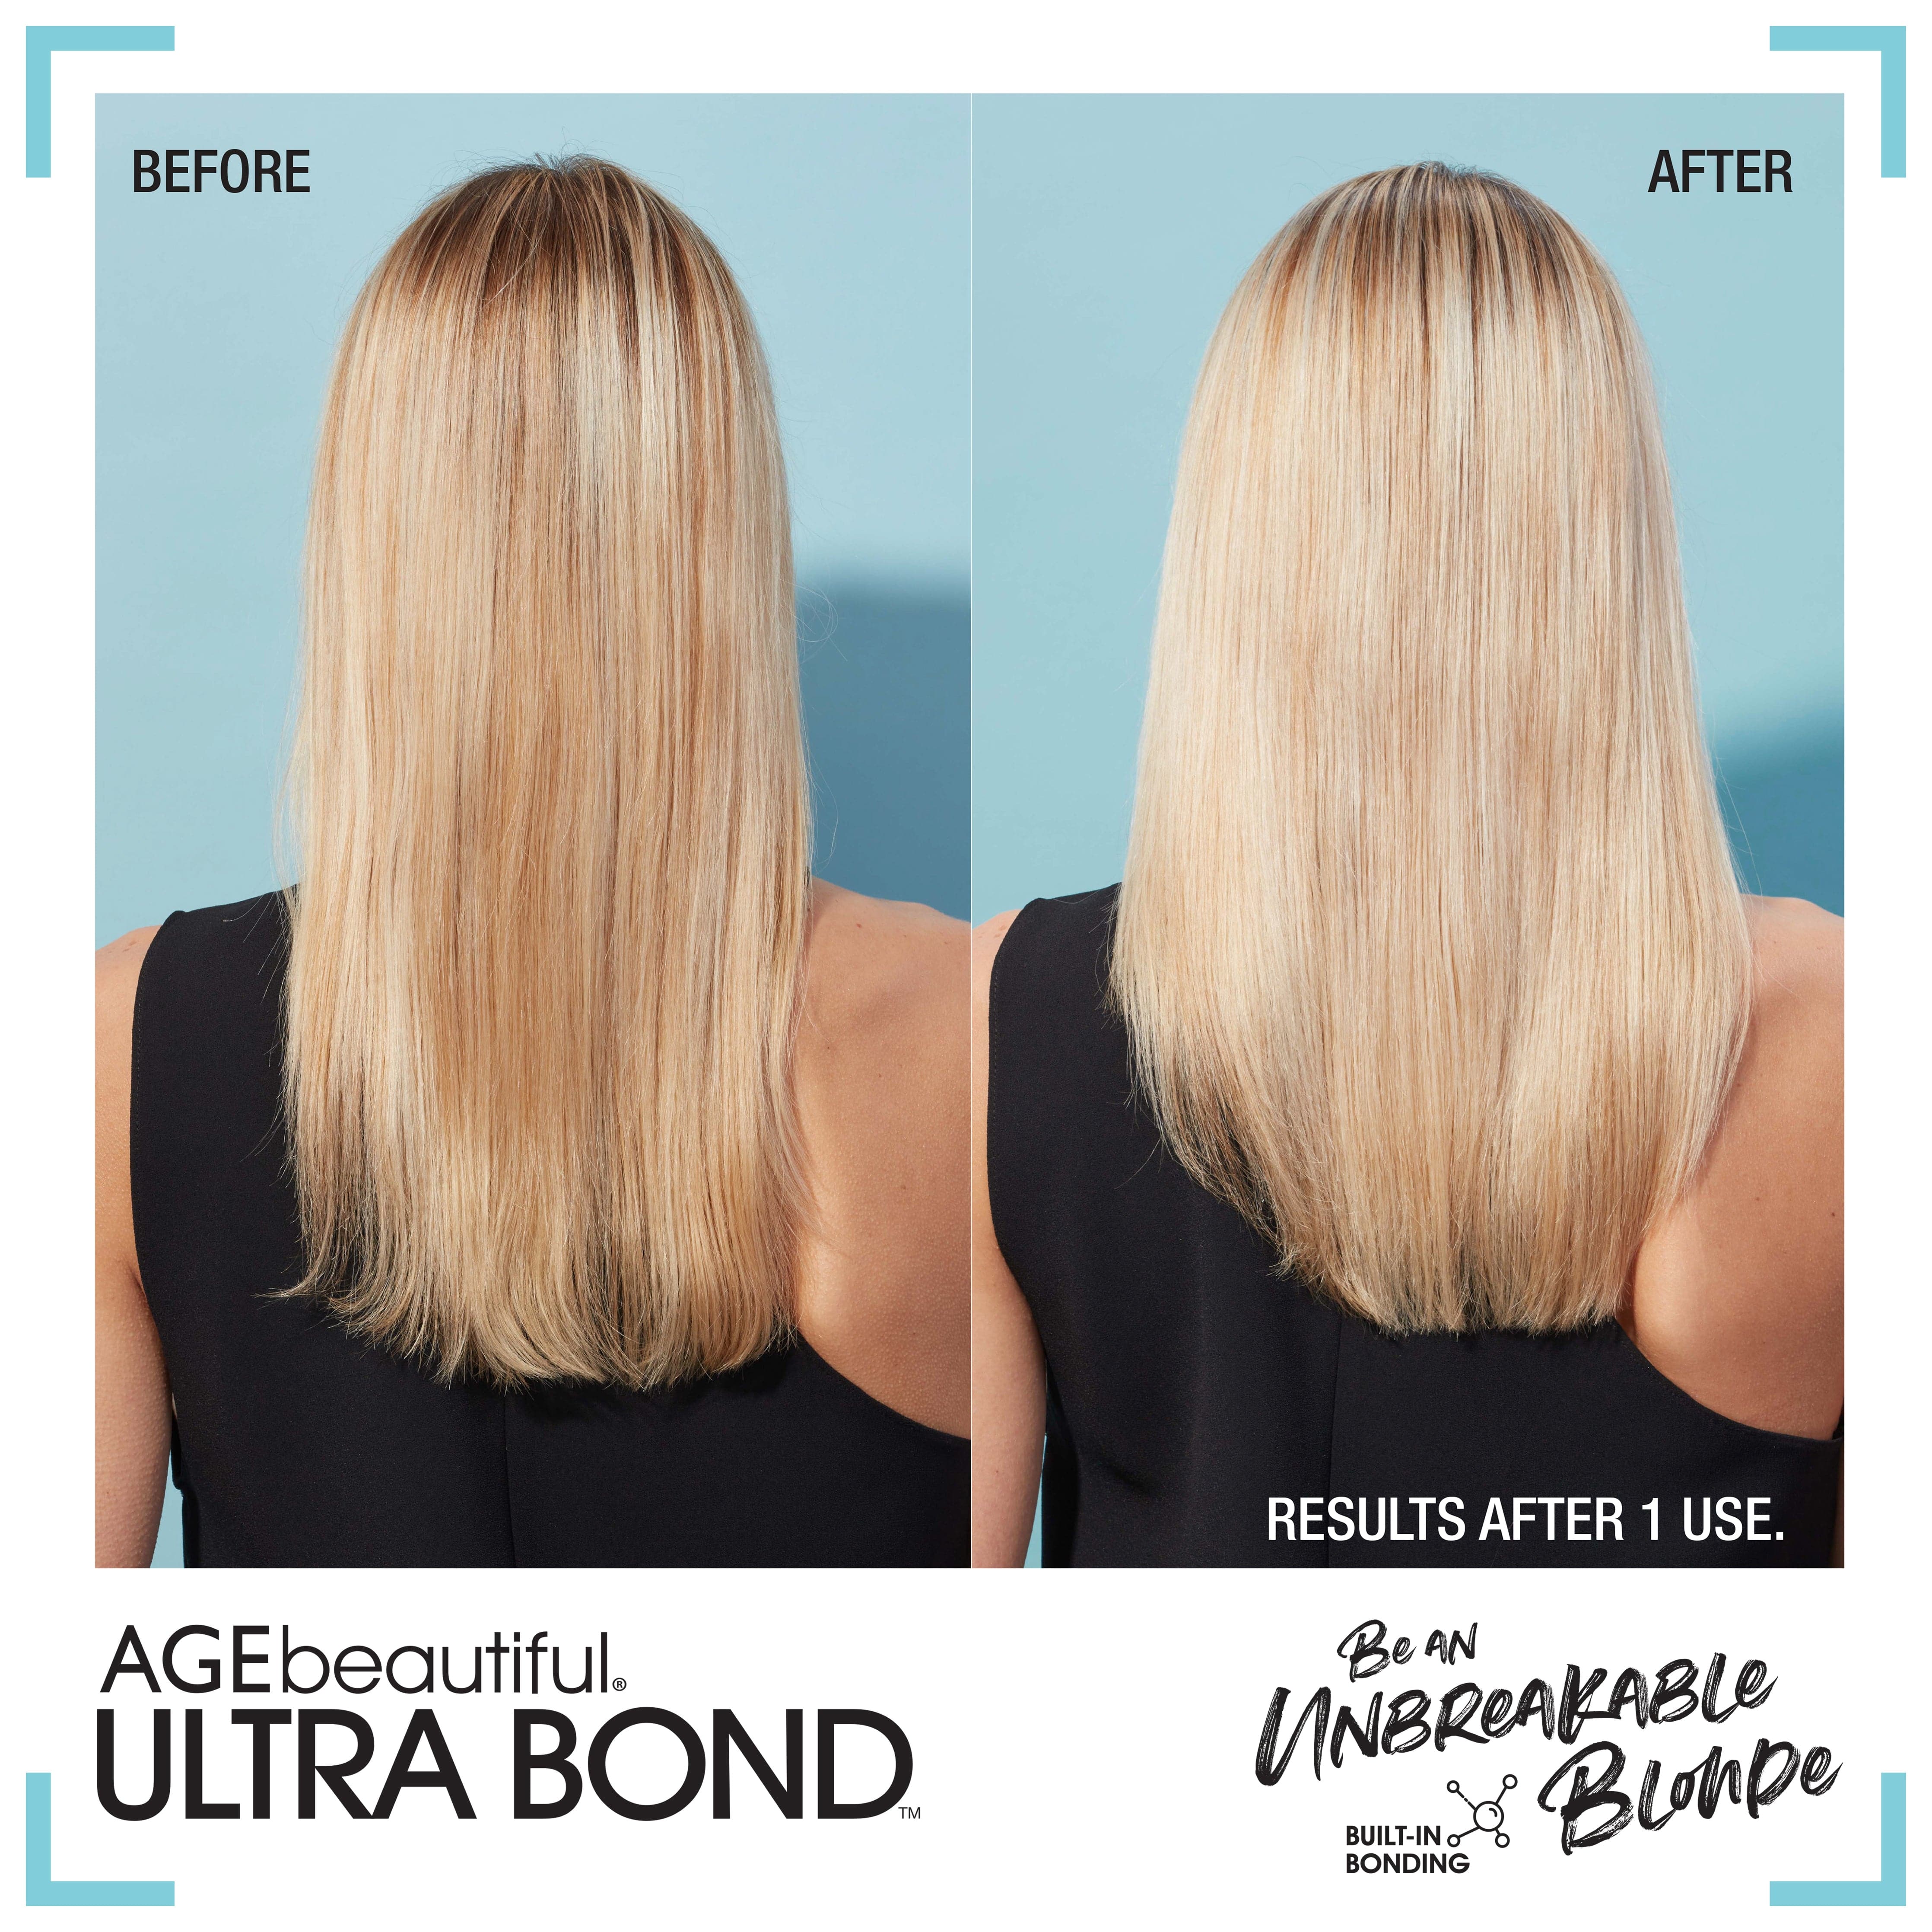 AGEbeautiful® Ultra Bond™ Overnight R&R Leave-in Treatment+ before & after